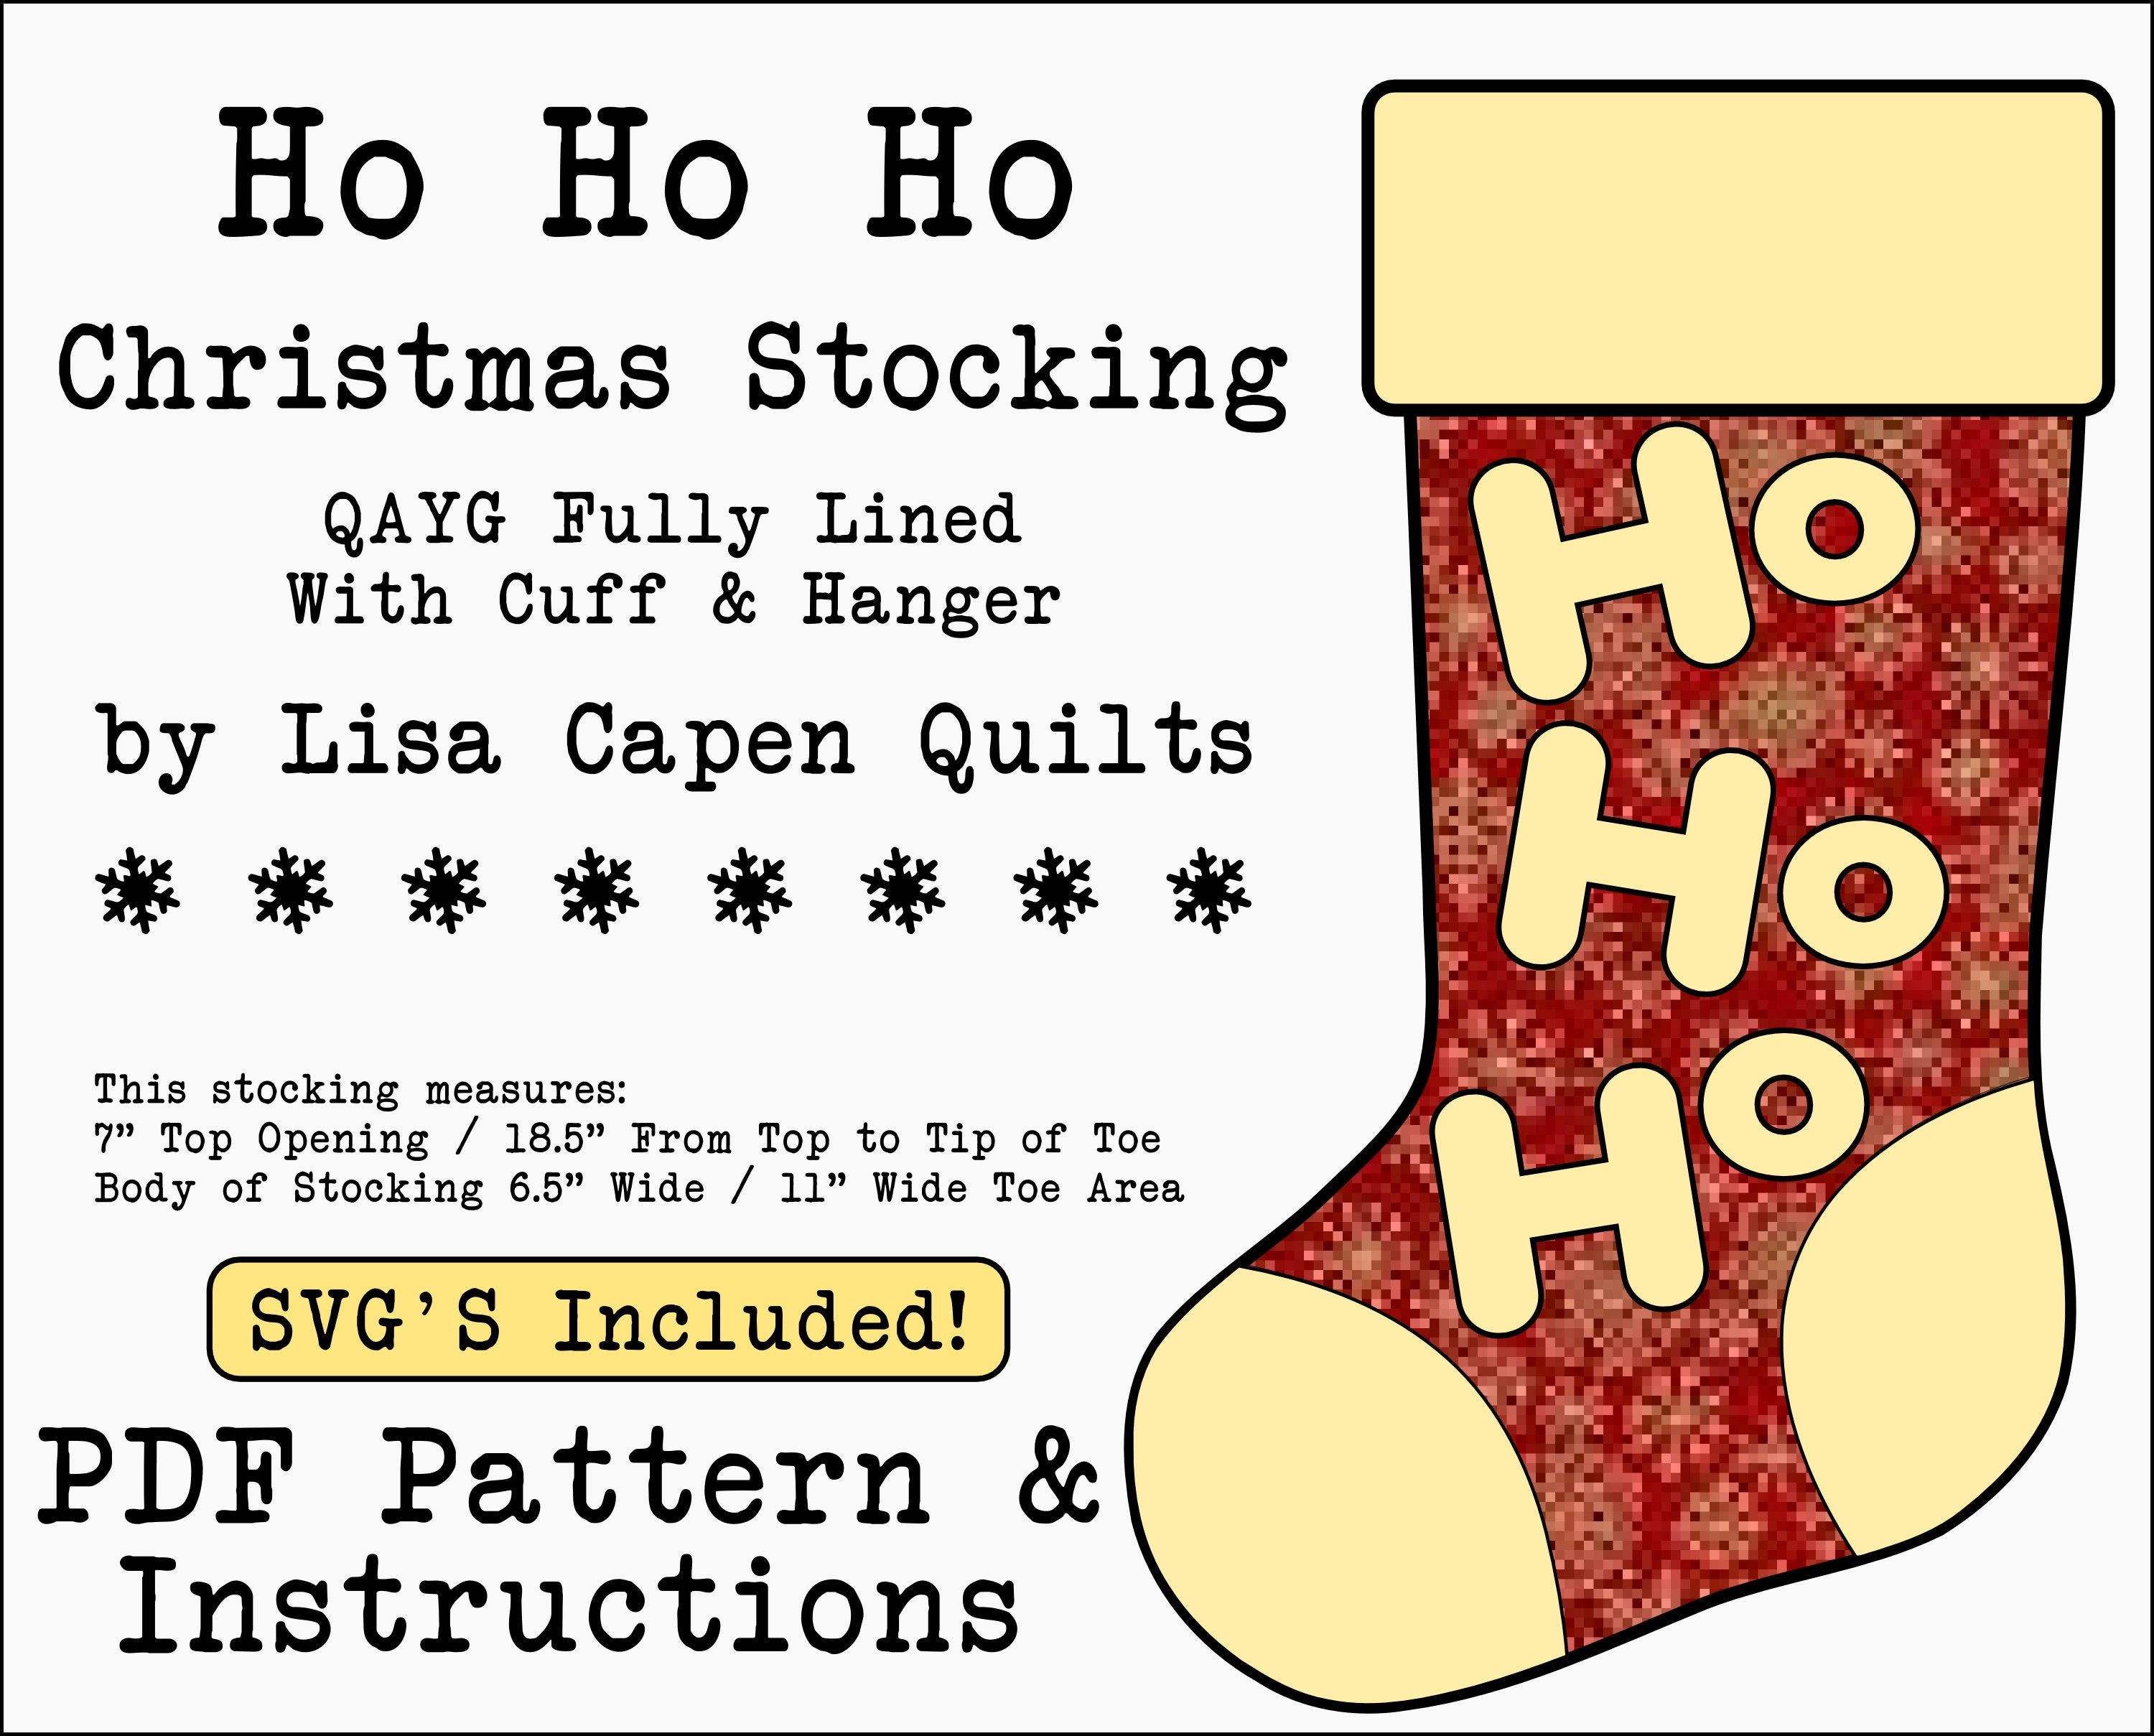 HoHoHo Quilted Christmas Stocking Pattern - SVGs Included - Applique Templates Included - QAYG - Instant PDF - 7" x 18.5" by LCQ